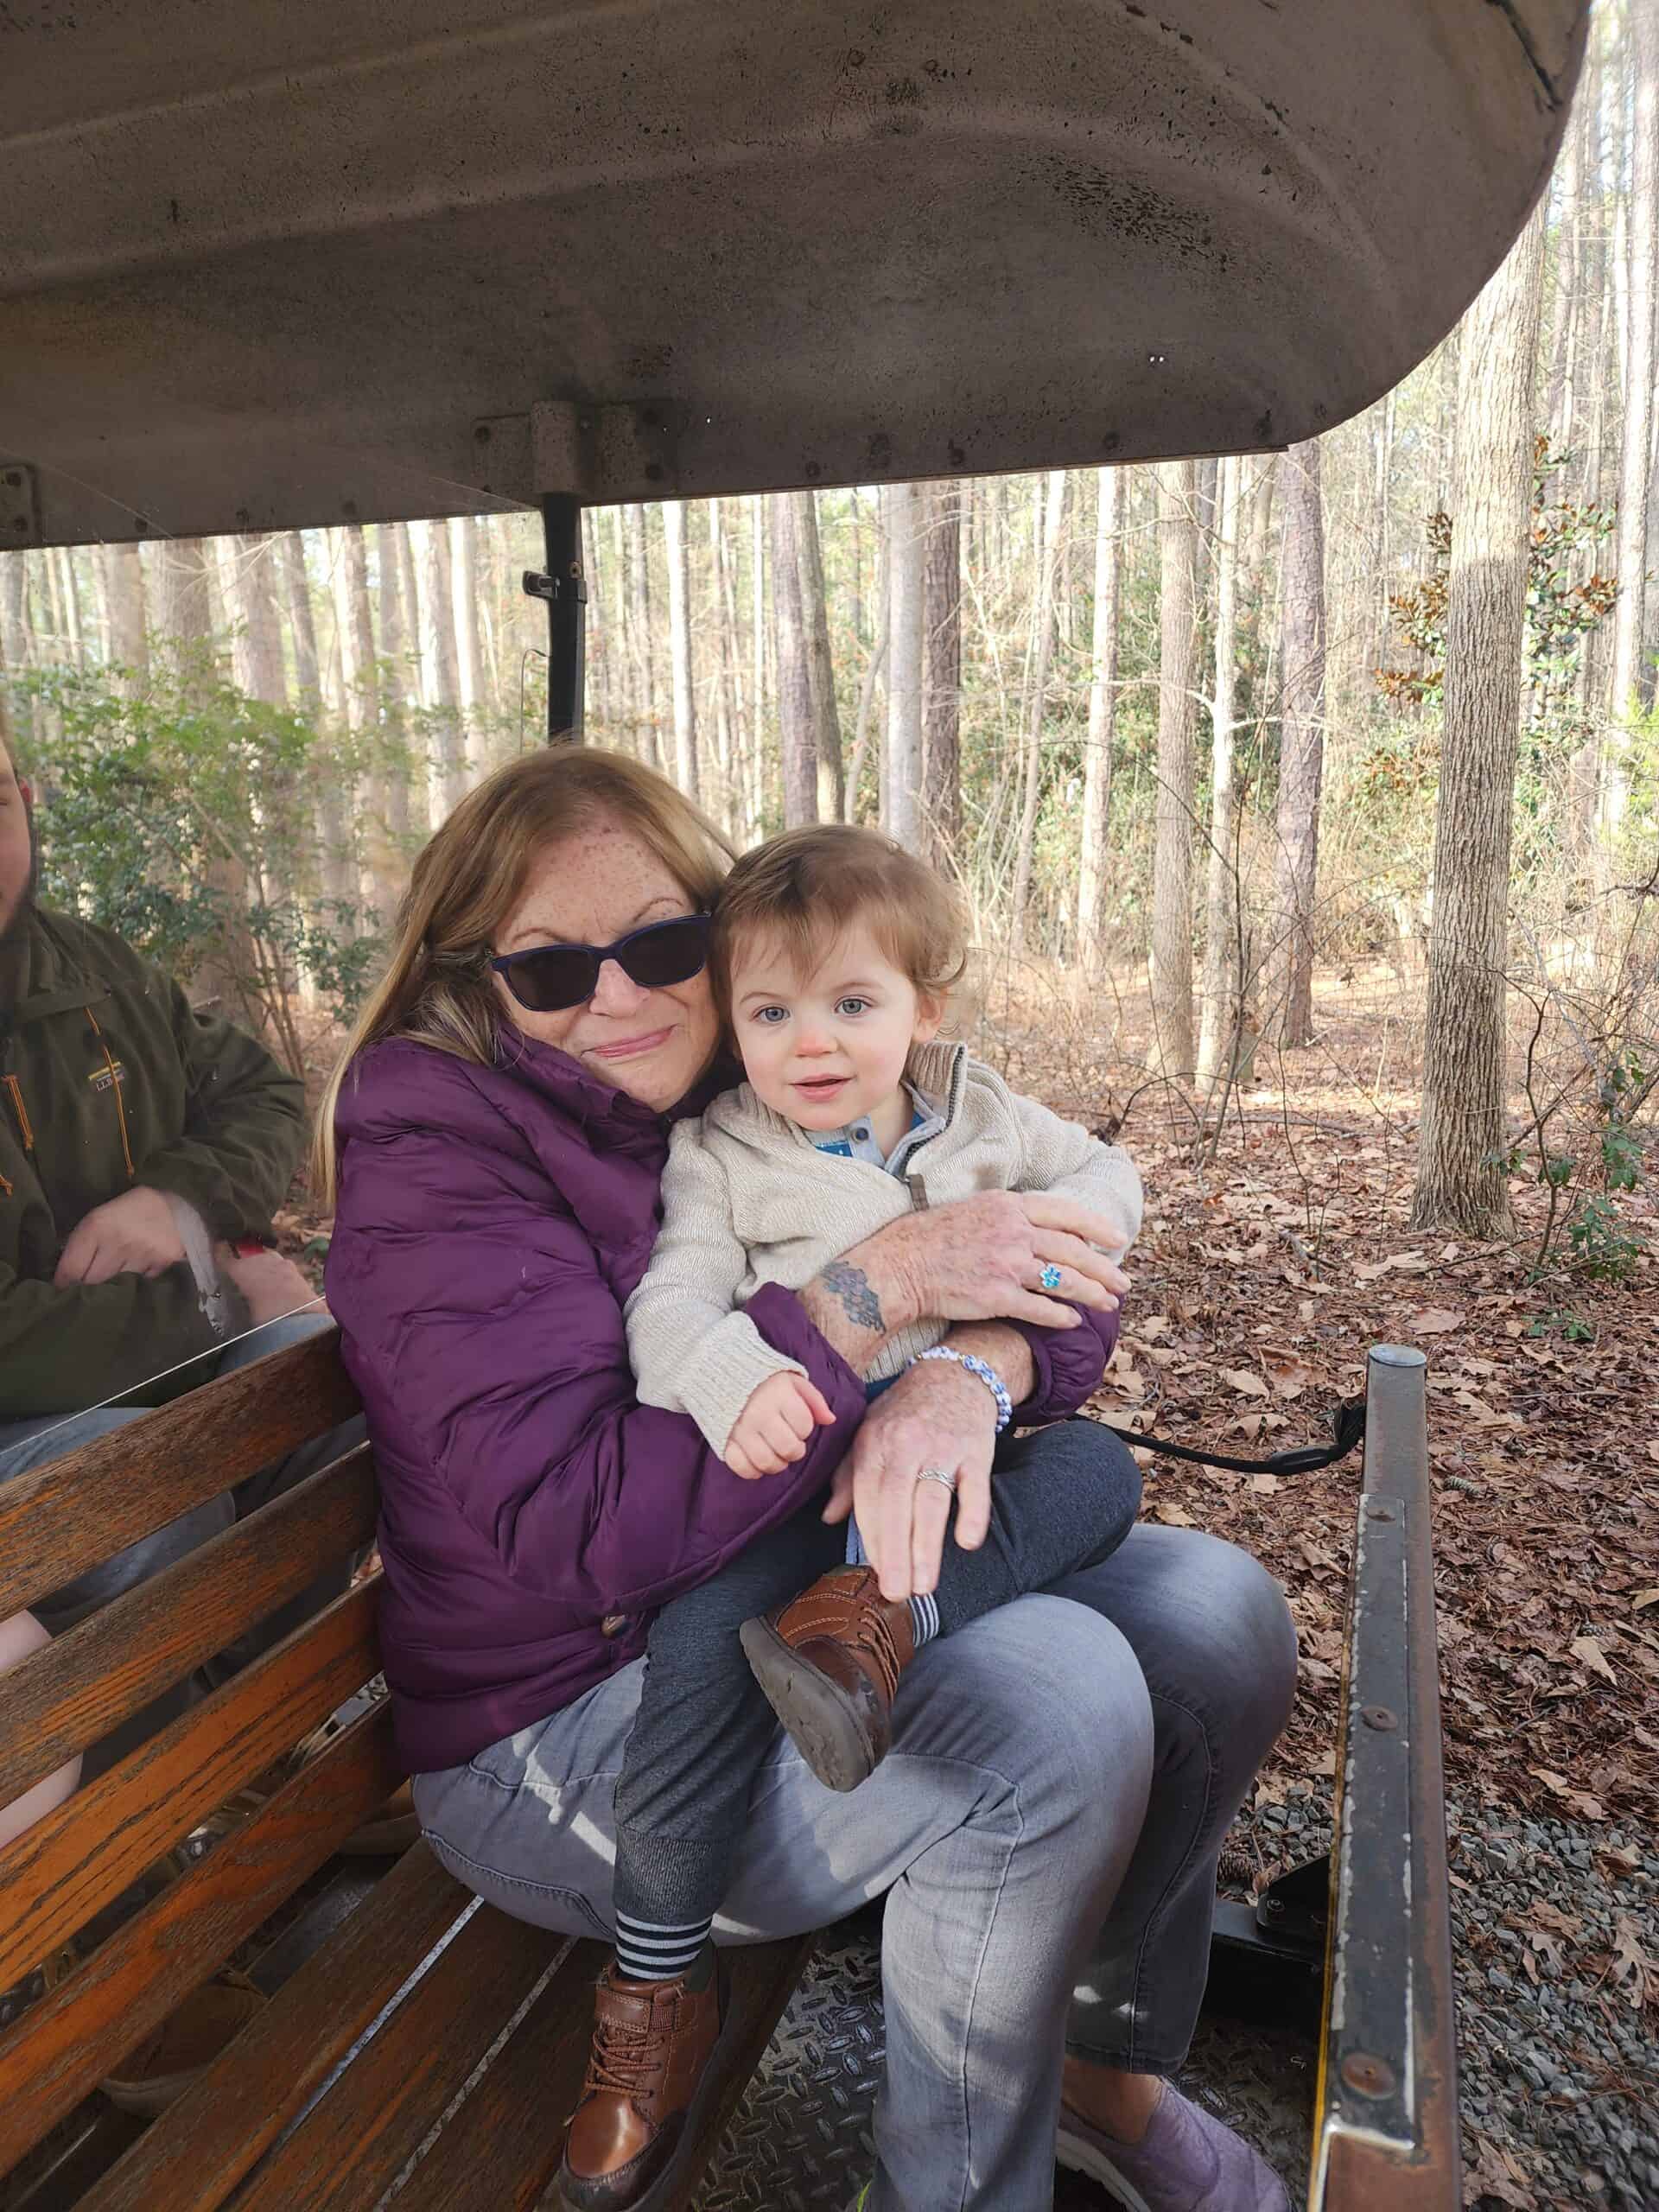 A heartwarming moment as a grandmother and toddler enjoy a train ride surrounded by the serene woods at the Museum of Life and Science in Durham, capturing a family experience at the educational attraction